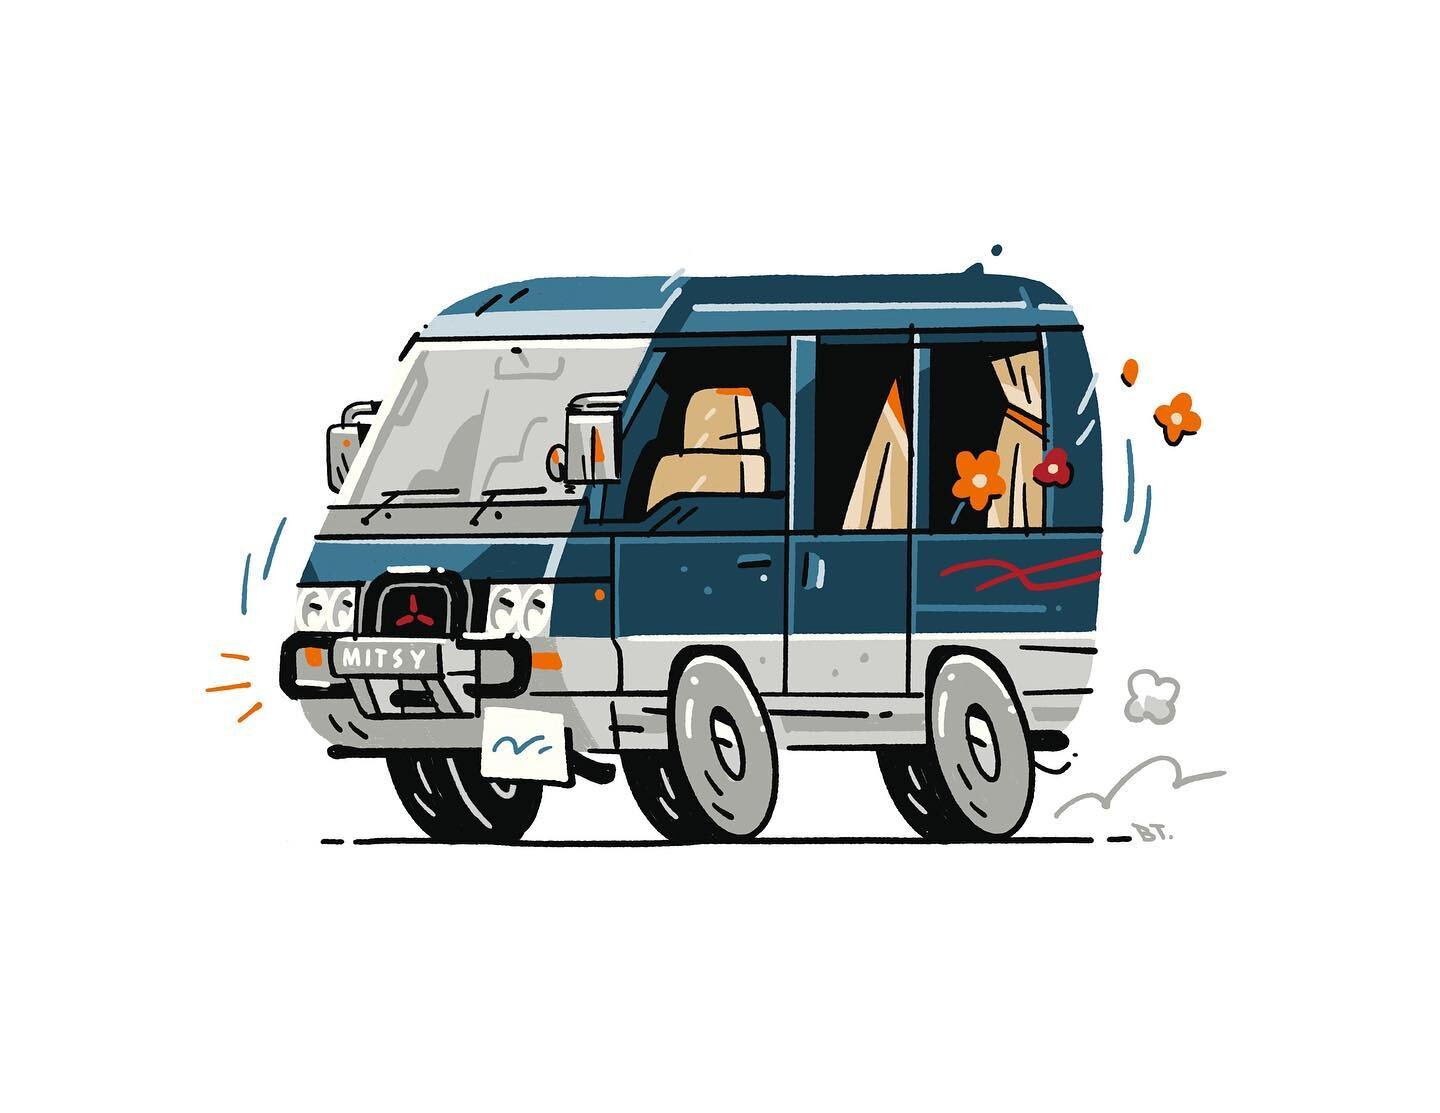 I've always enjoyed drawing cars since I was a kid. I don't really care or know much about makes or models, I just like drawing them.

I drew this as a gift for our neighbour at our old building who owned a Delica, lovingly named Mitsy. This van was 